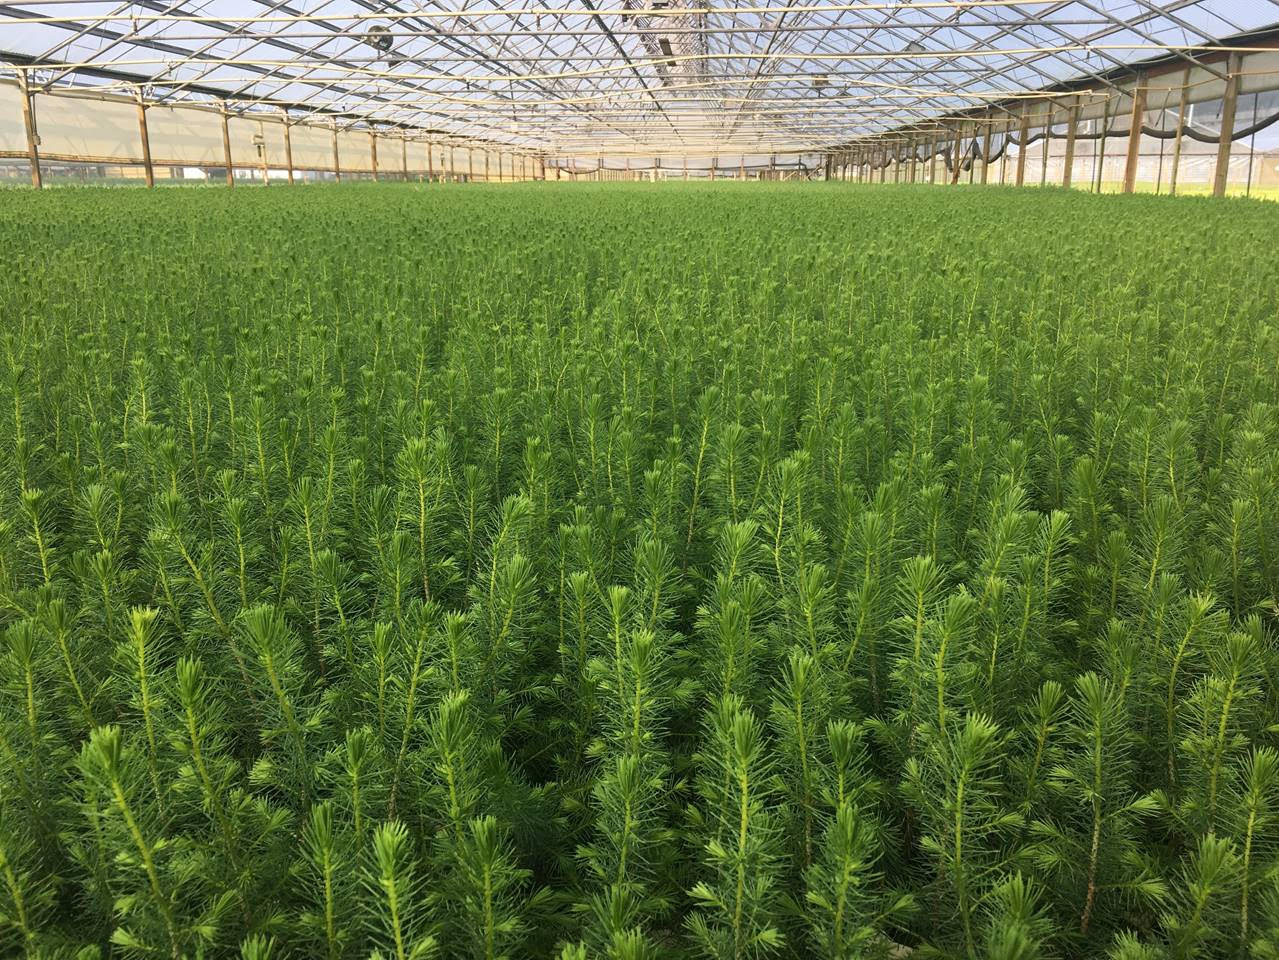 Red spruce seedlings growing in a greenhouse